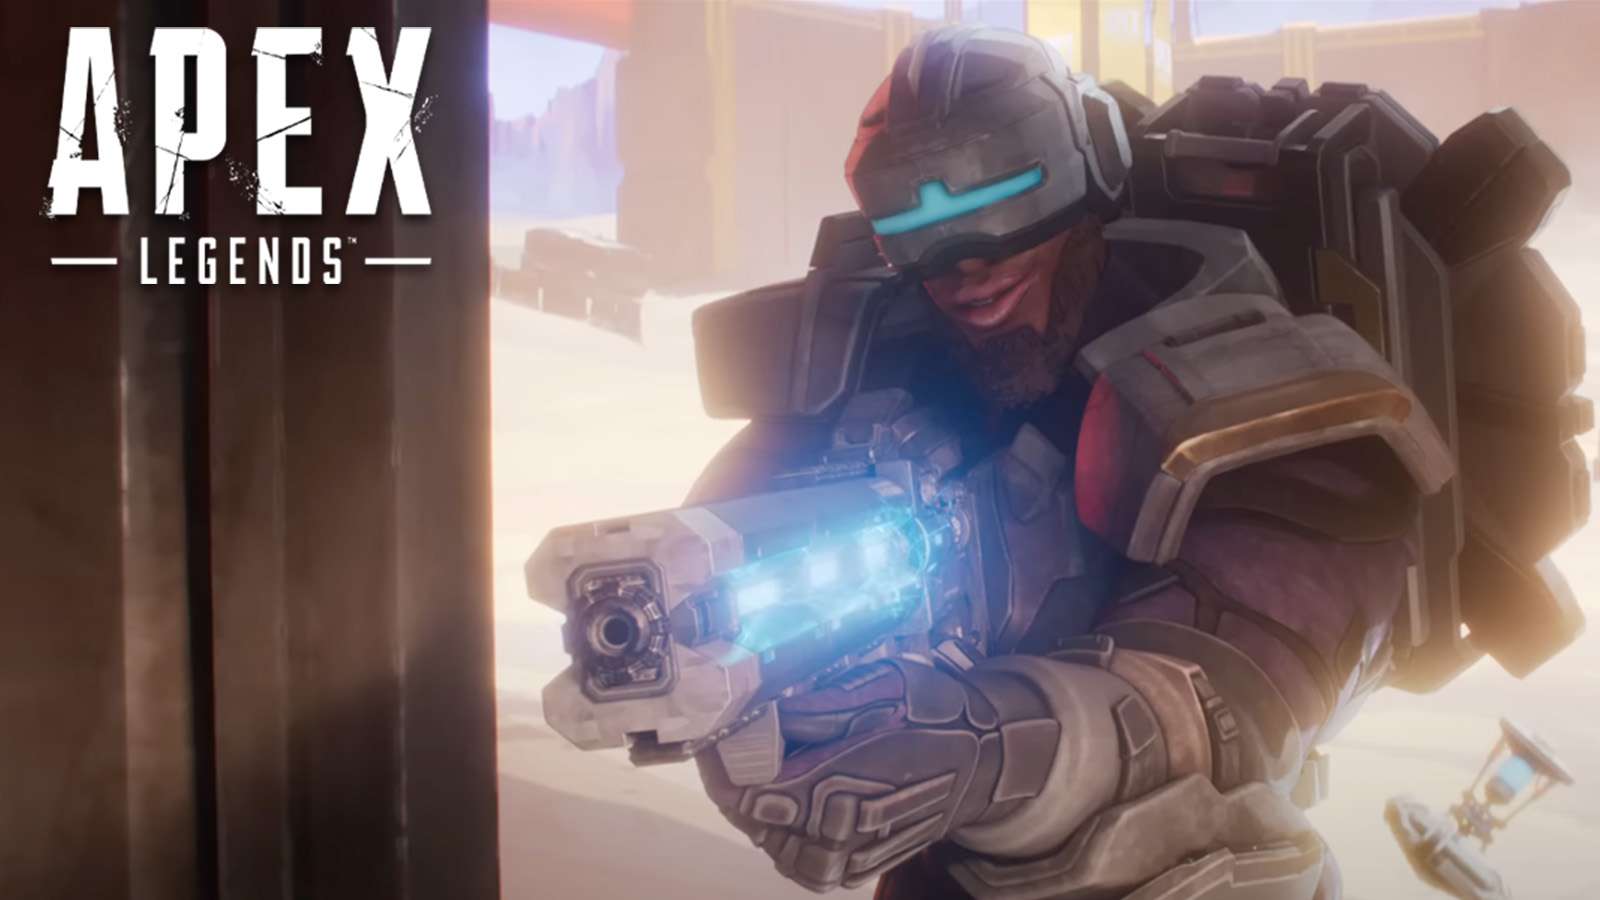 Newcastle in Apex Legends holding charge rifle in doorway